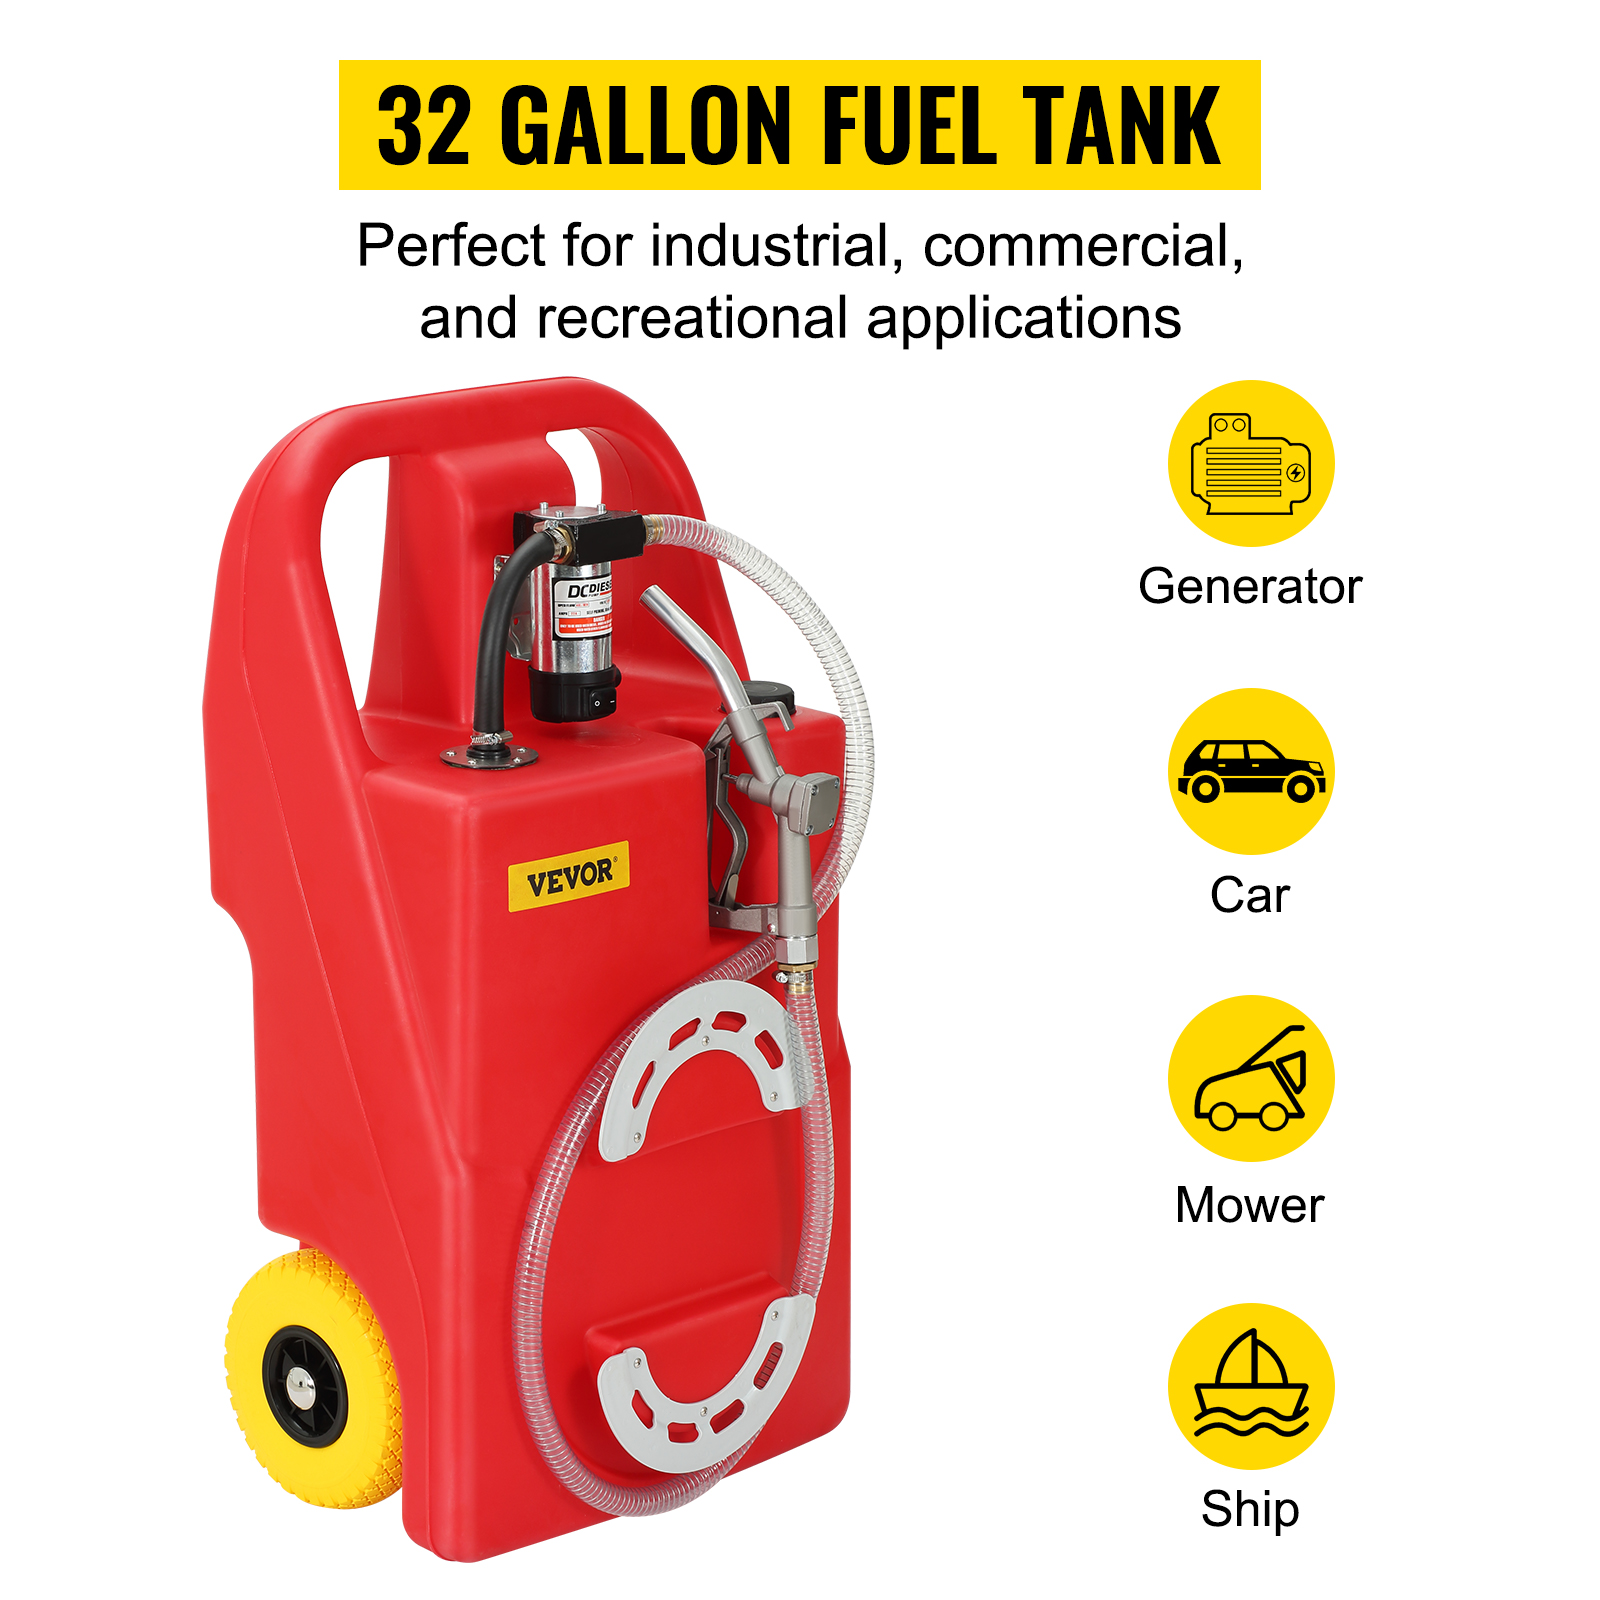 VEVOR Portable Diesel Tank, 58 Gallon Capacity & 10 GPM Flow Rate, Diesel  Fuel Tank with 12V Electric Transfer Pump and 13.1ft Rubber Hose, PE Diesel